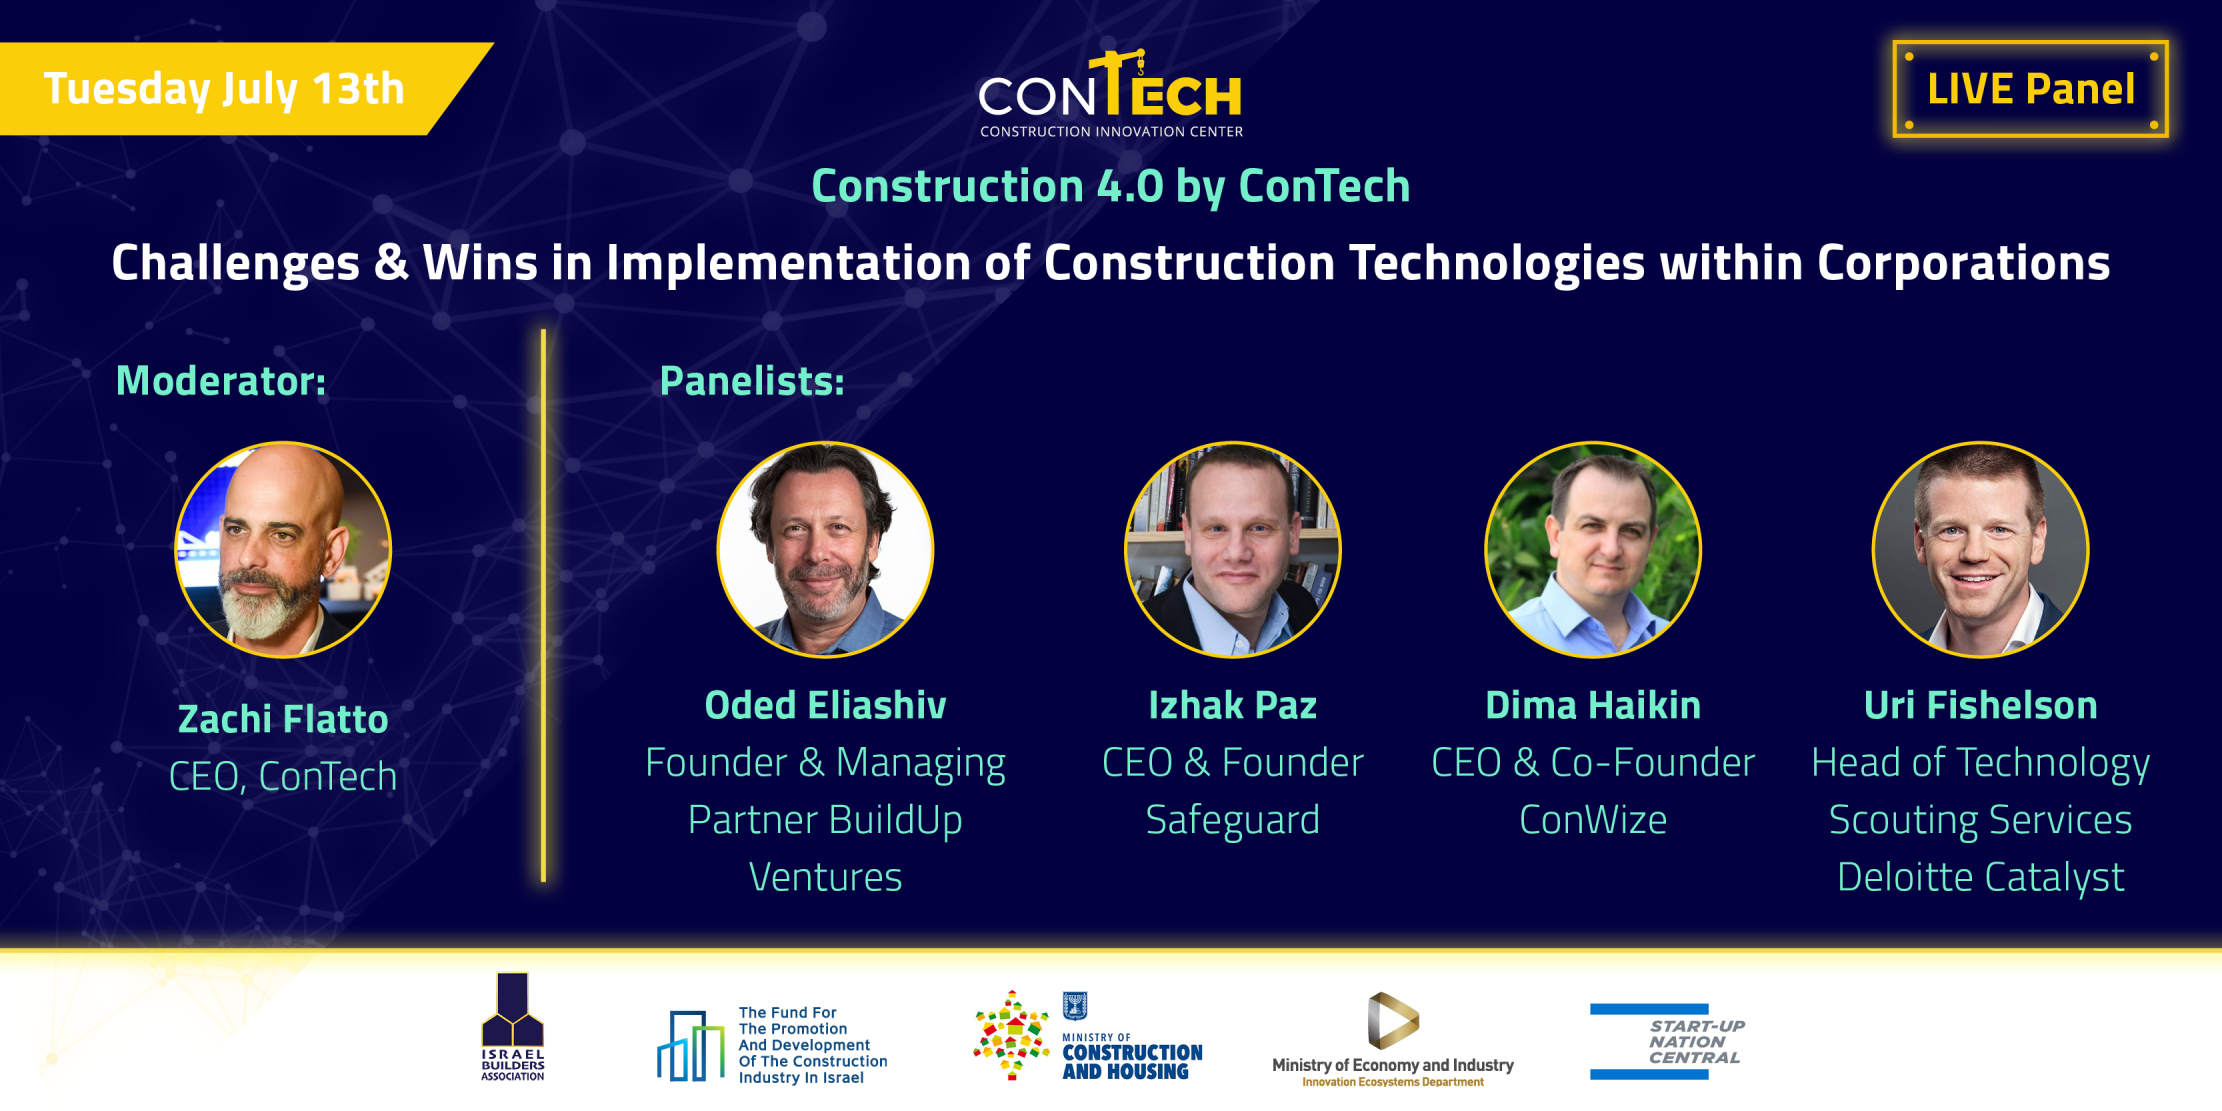 Live Panel: Challenges & Wins in Implementation of Construction Technologies within Corporations